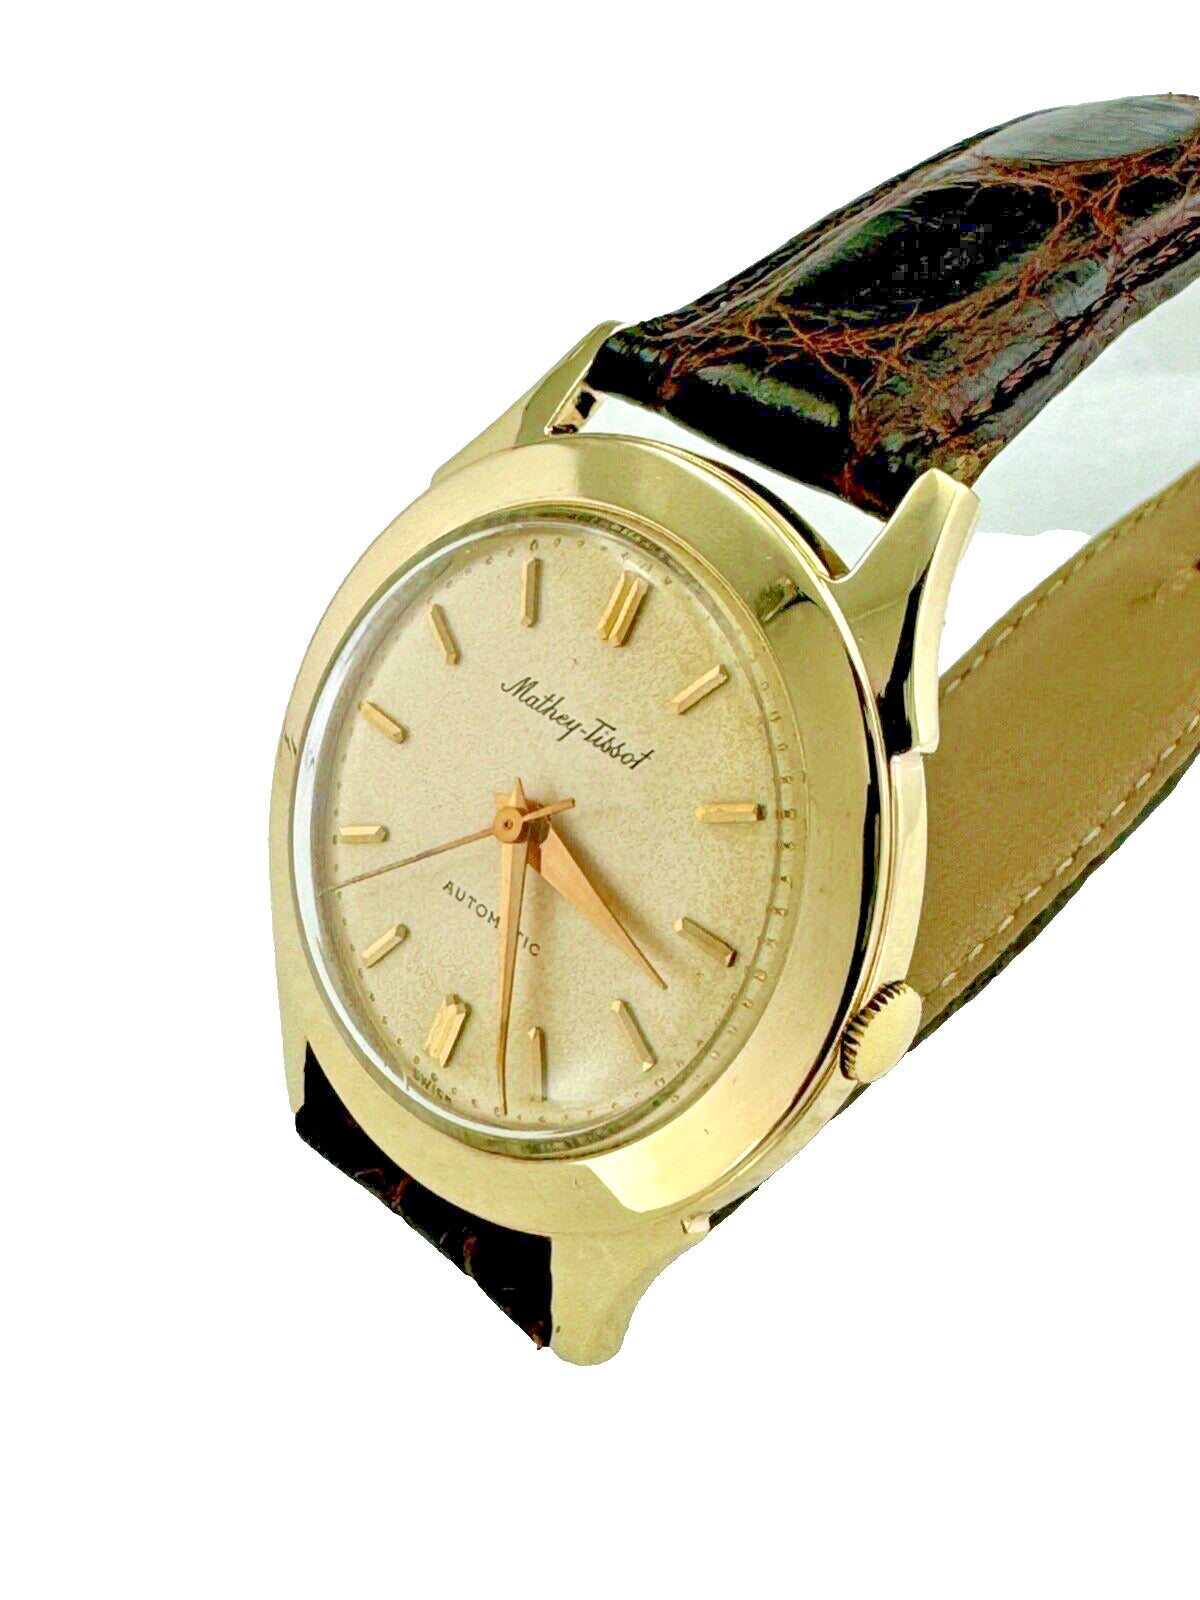 Mathey Tissot Automatic Non Magnetic Men's Watch 14K Yellow Gold